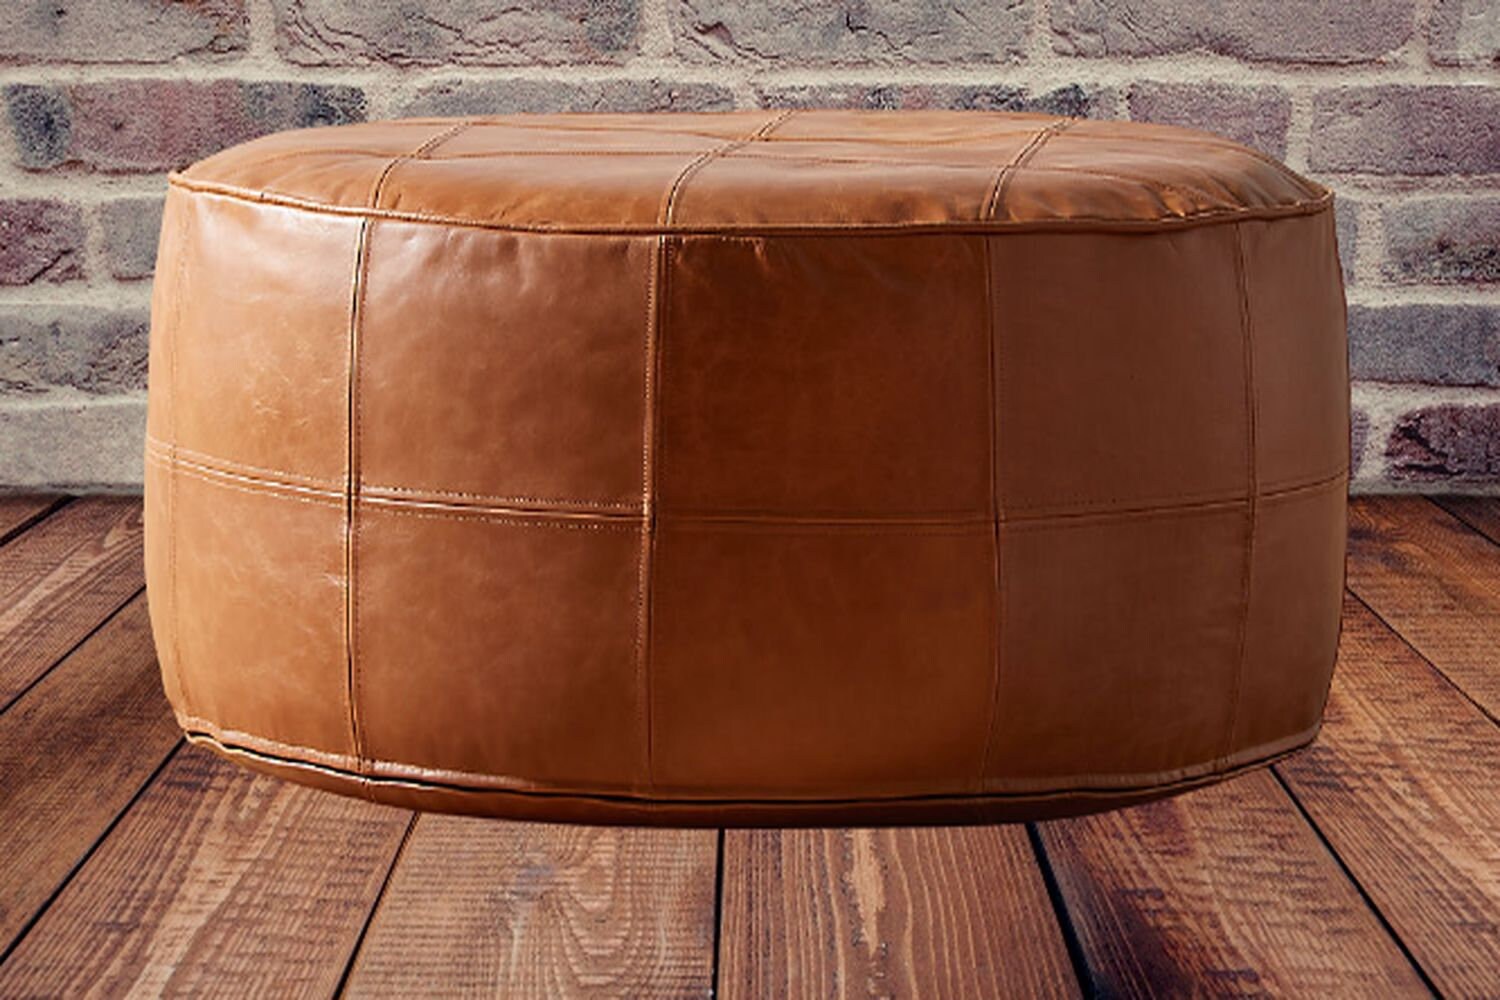 Comfy And Cozy Ottoman Round Coffee, Leather Coffee Table Ottoman Round